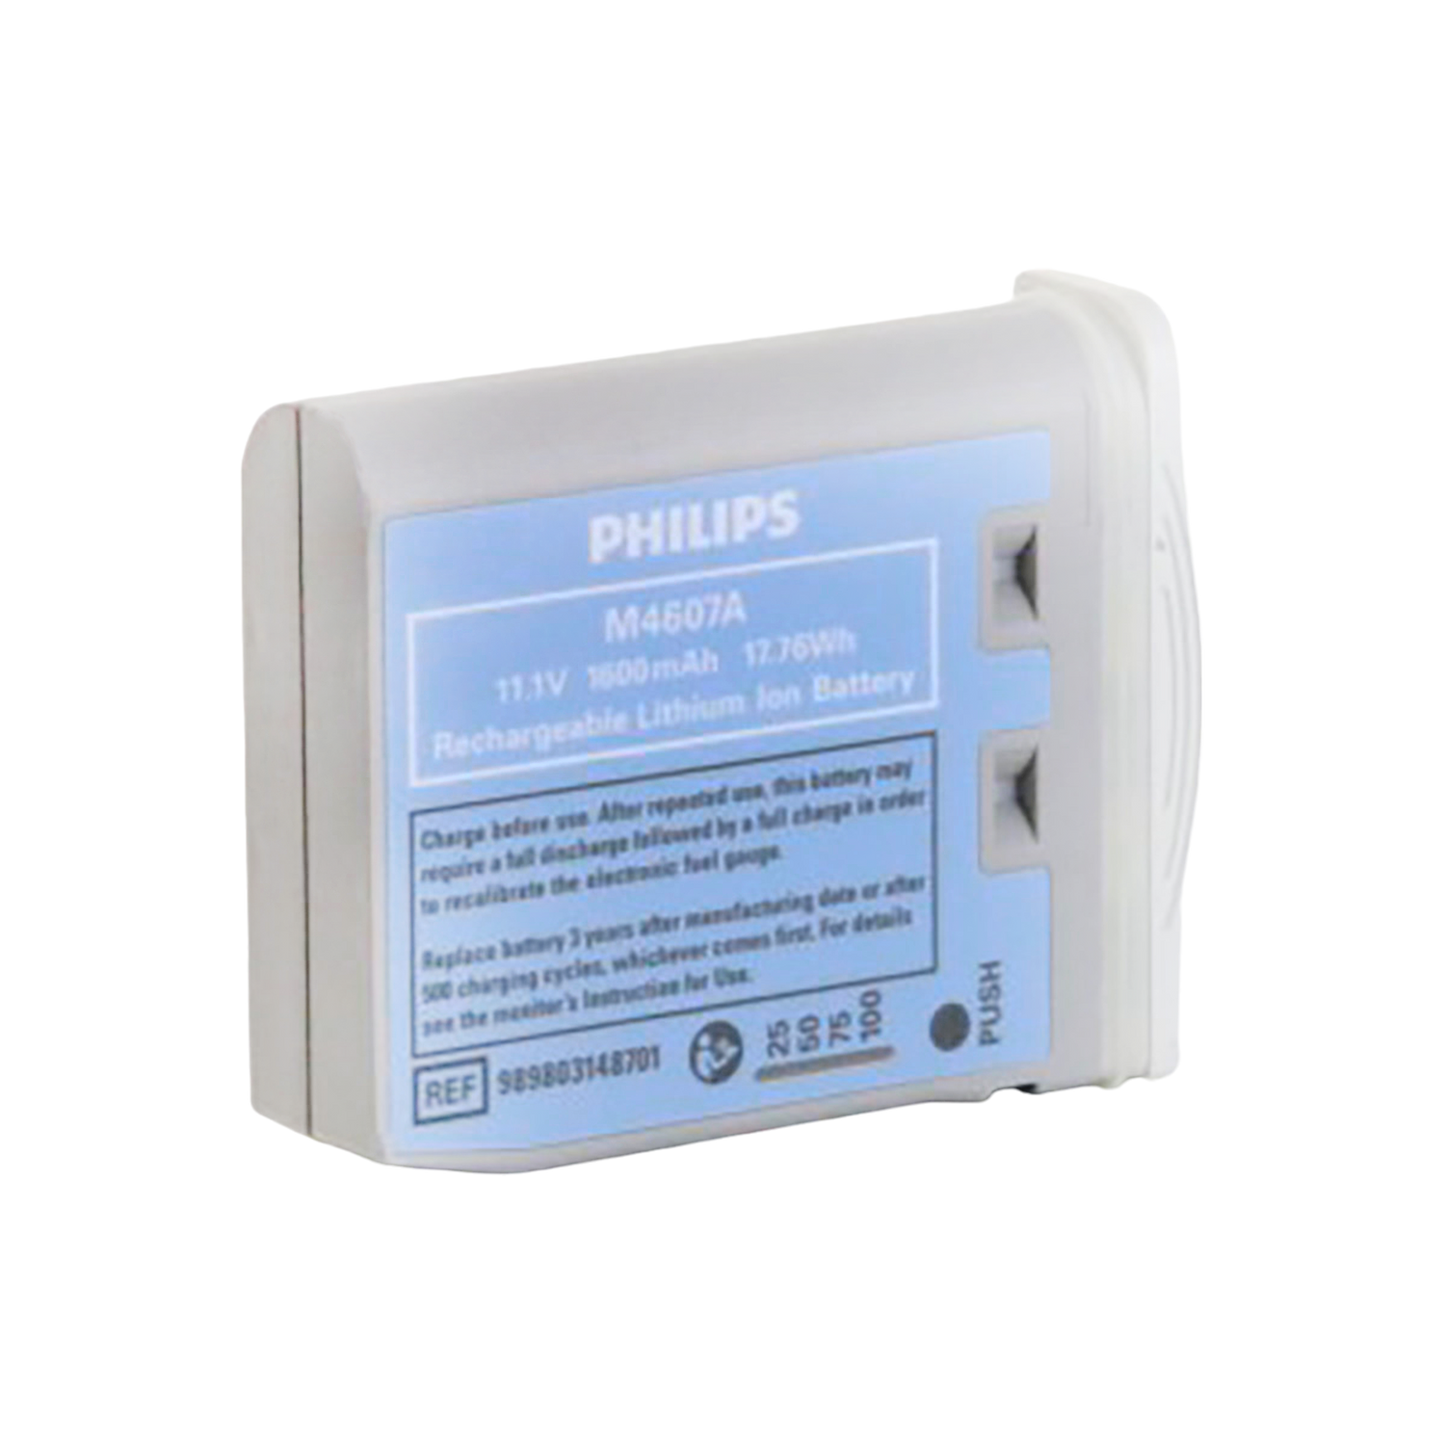 Philips IntelliVue MP2/X2 M4607A 10.8V 1Ah 1.6Ah Lithium-Ion Battery